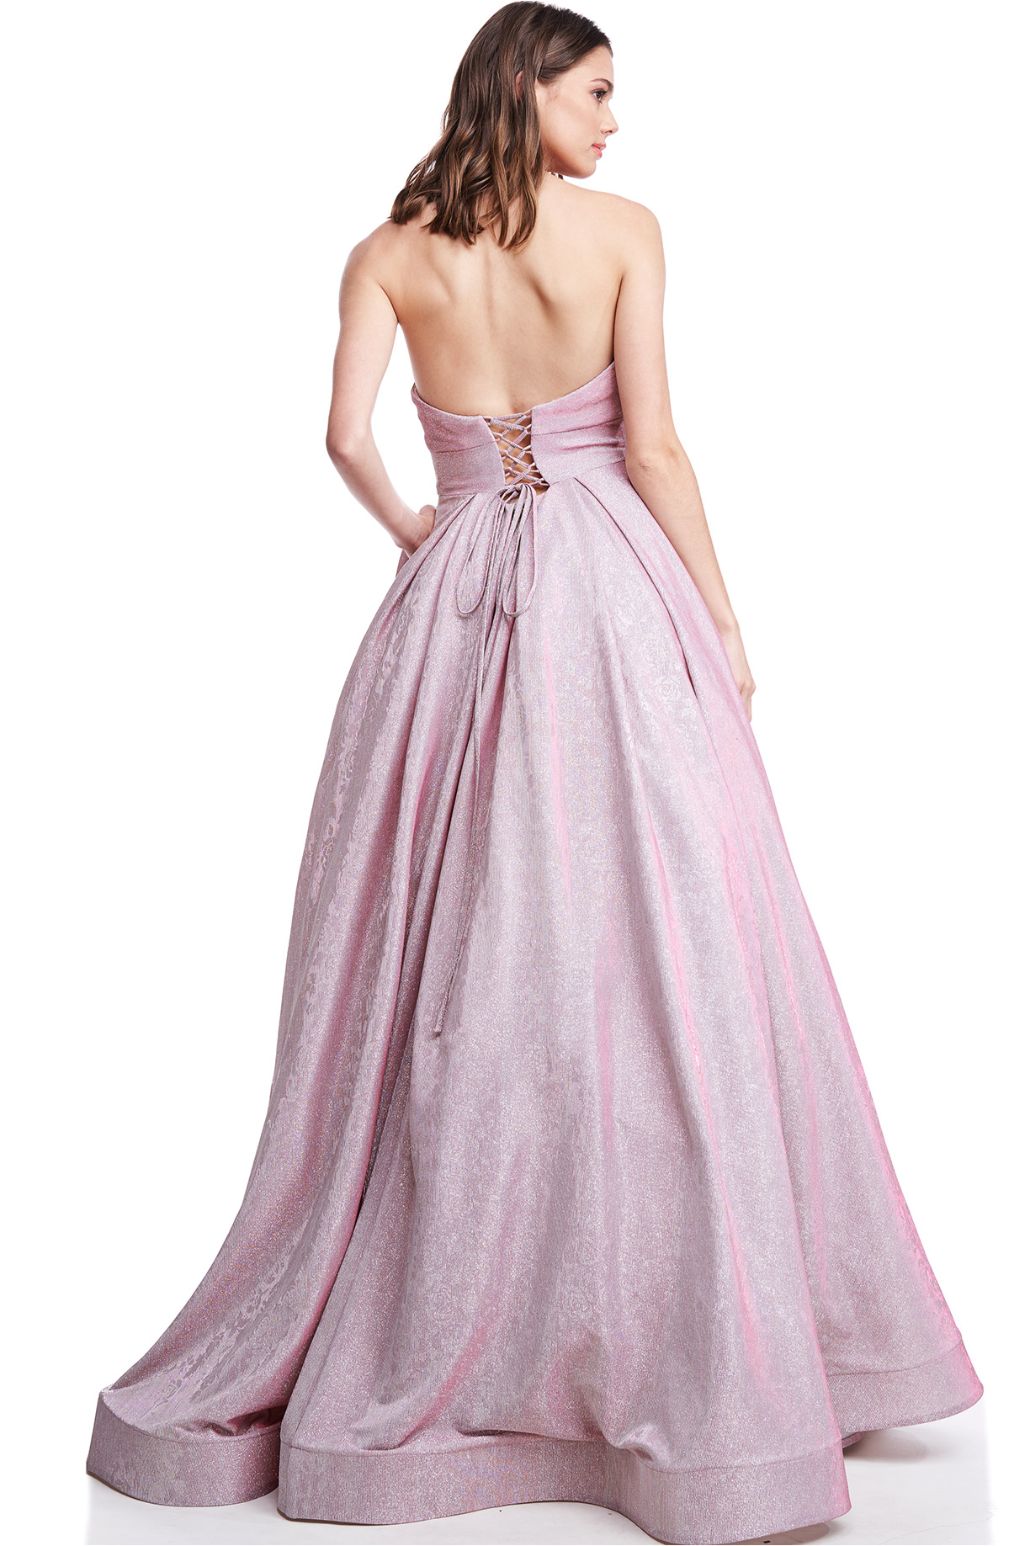 lilac ball gowns